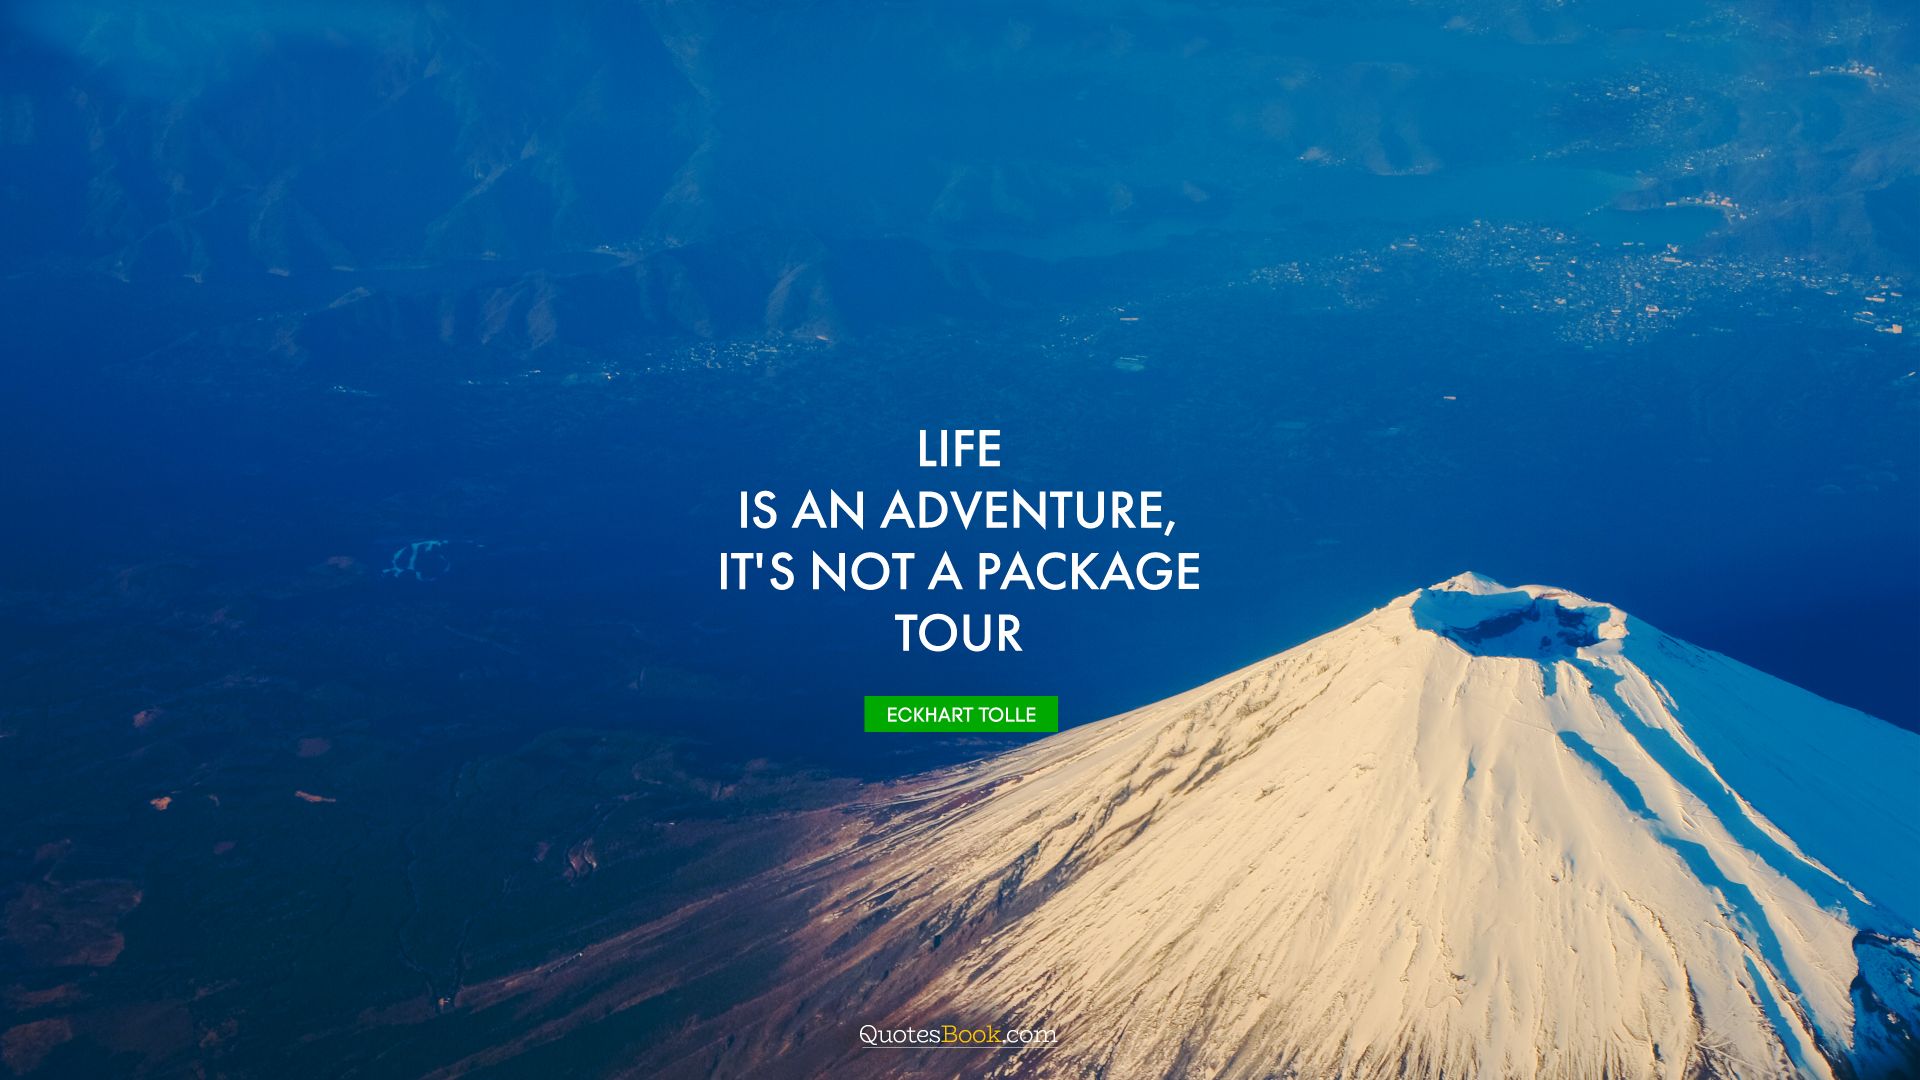 Life is an adventure, it's not a package tour. - Quote by Eckhart Tolle